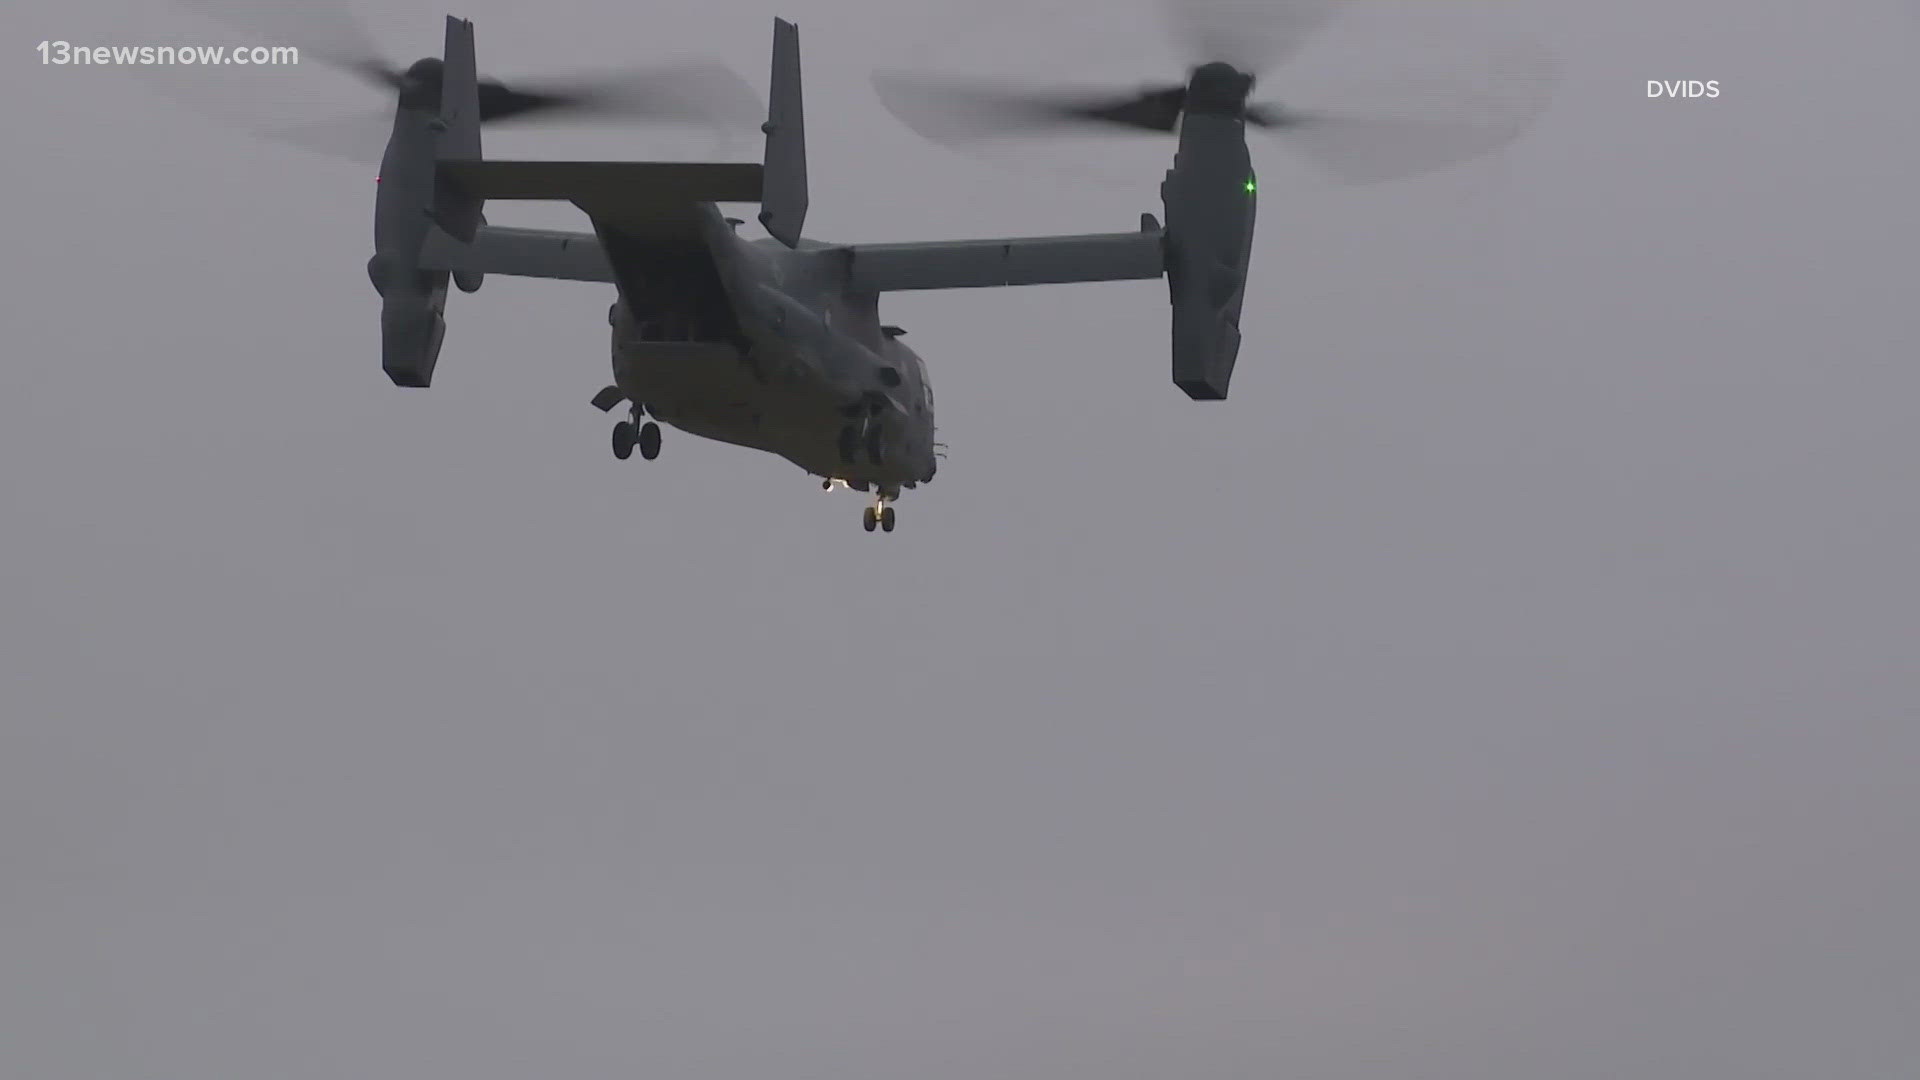 After four mishaps and 20 deaths in the past two and half years, the military's V-22 Osprey remains under intense scrutiny.